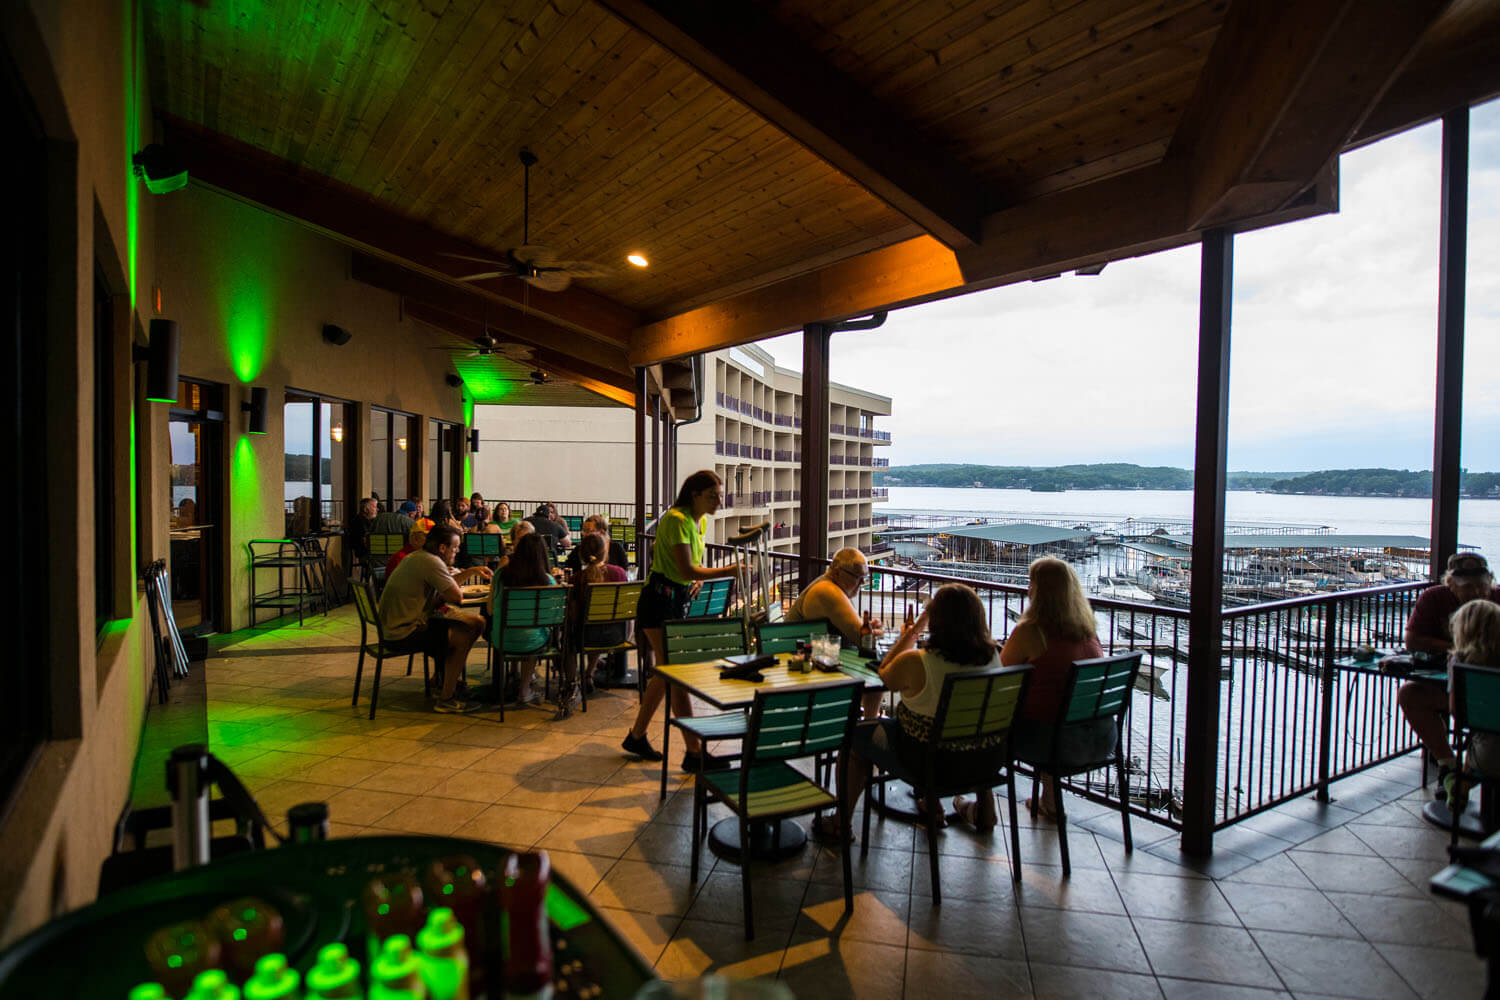 Patio seating facing the lake at H. Toad's Bar and Grill and Camden on the Lake Resort Lake of the Ozarks